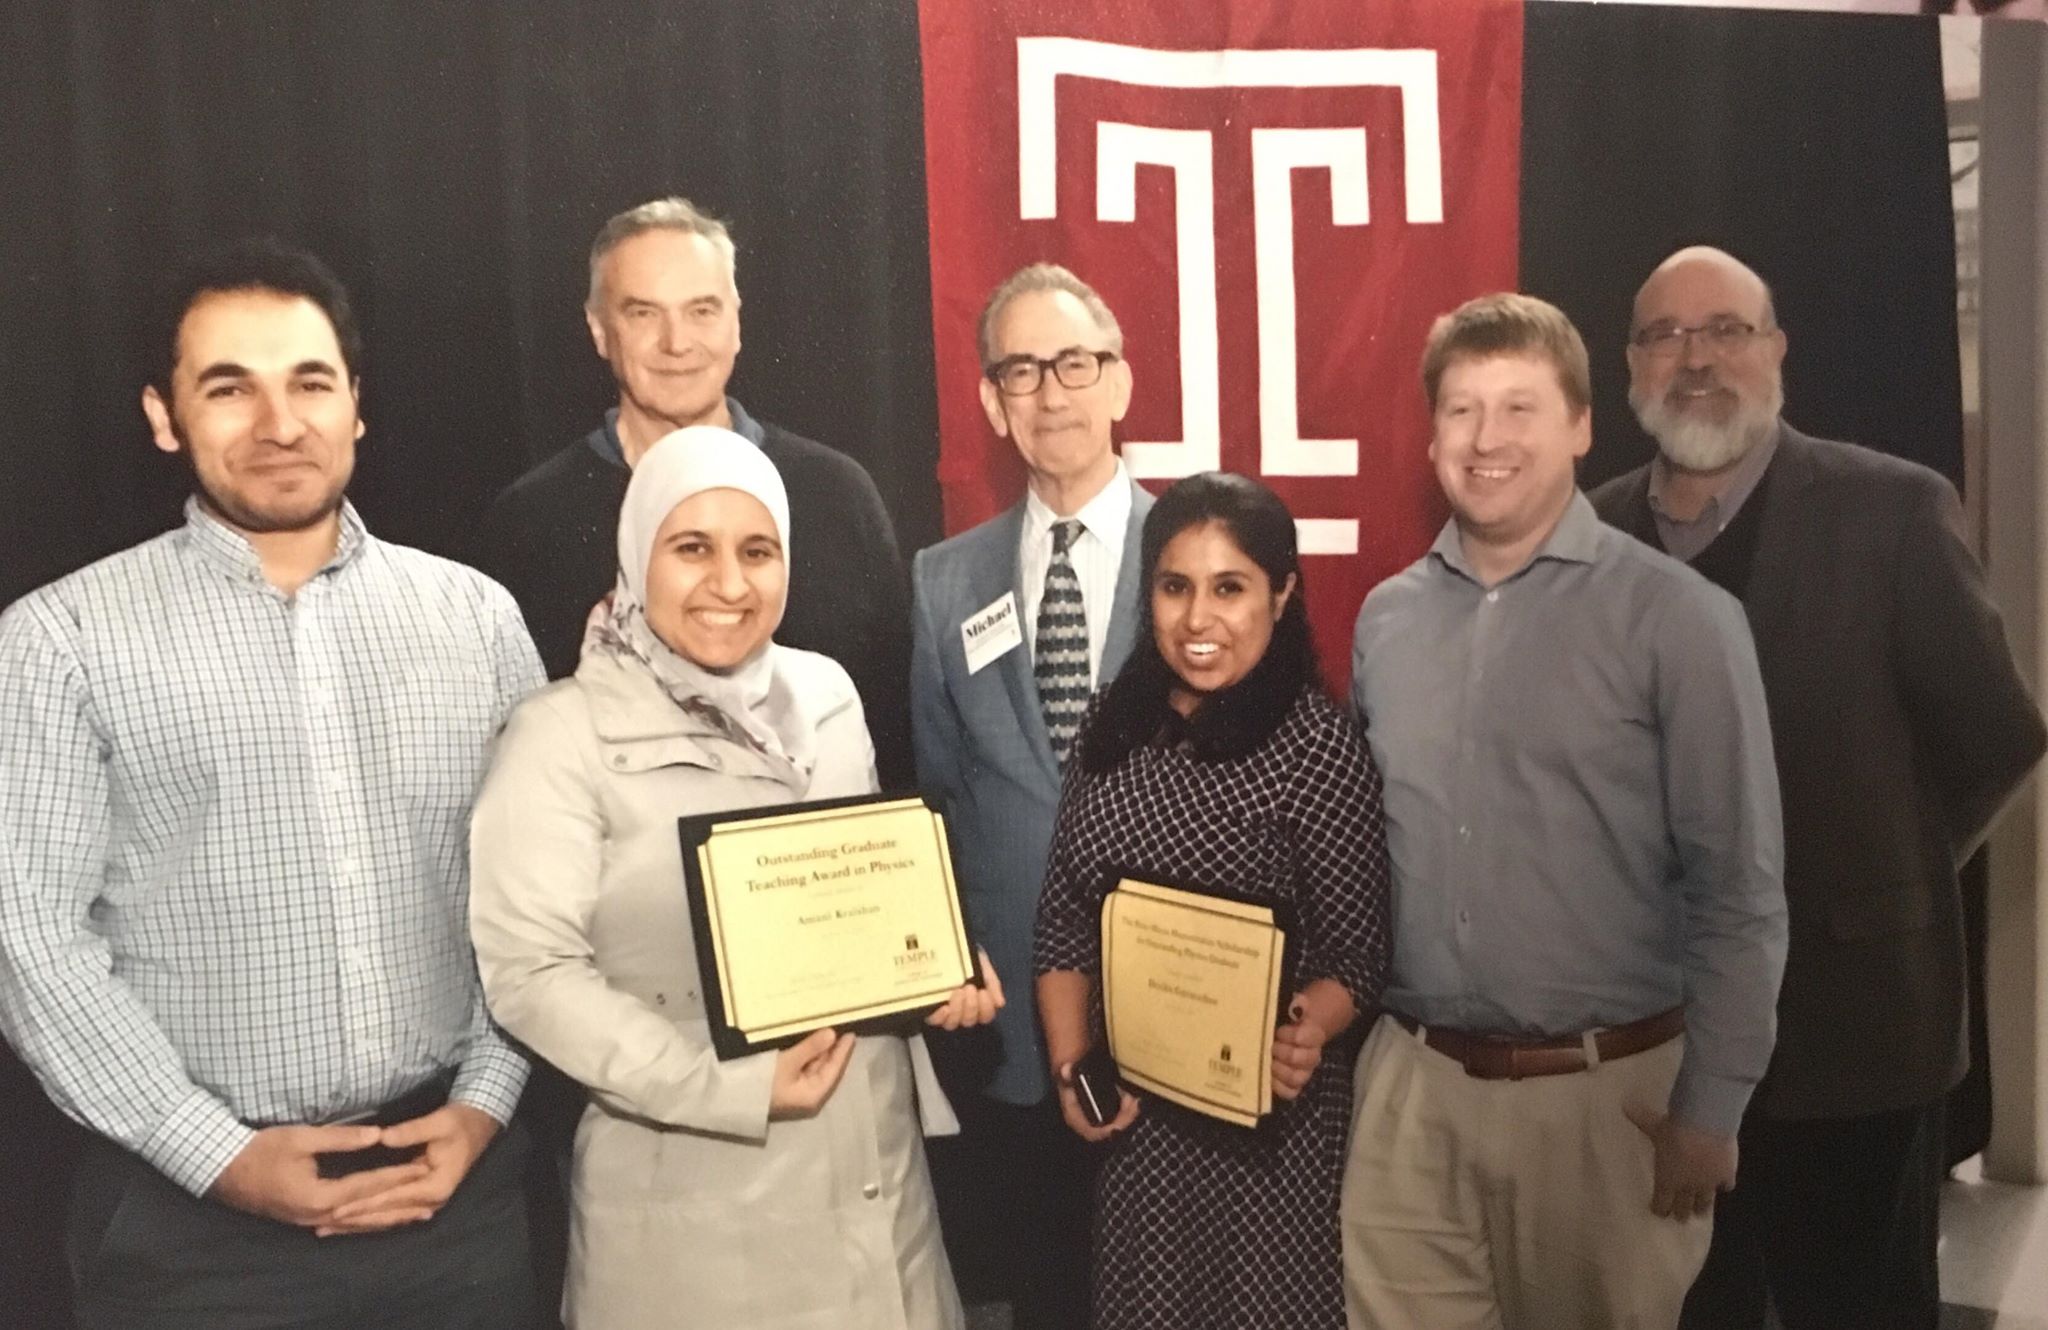 Dr. Amani Krishan is one of the university's top students who excel in physics at Temple University students in America